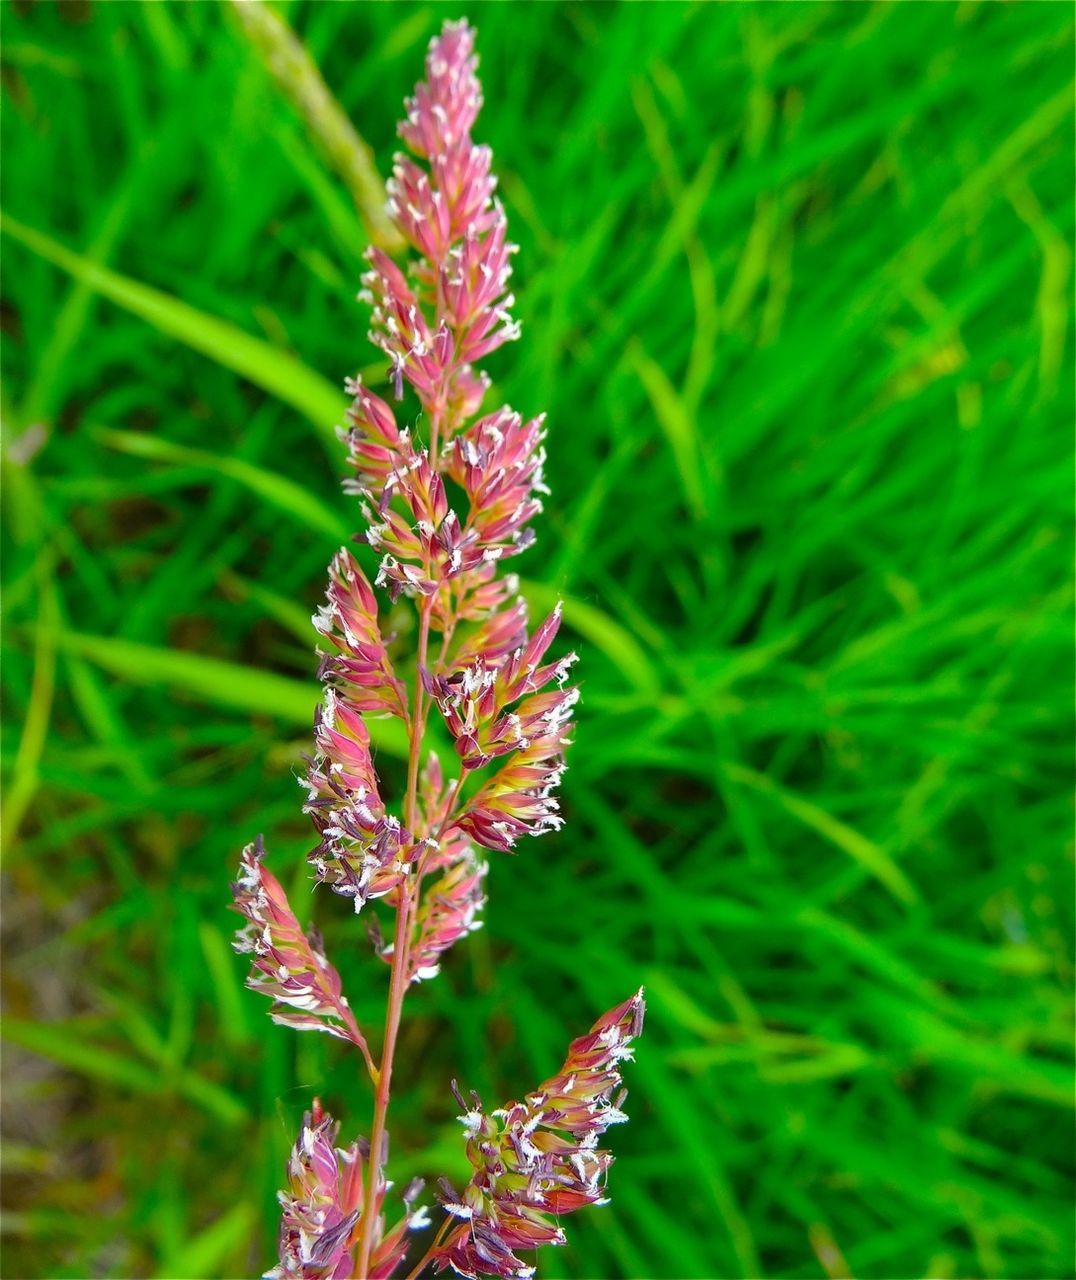 Close-up of flower against grass